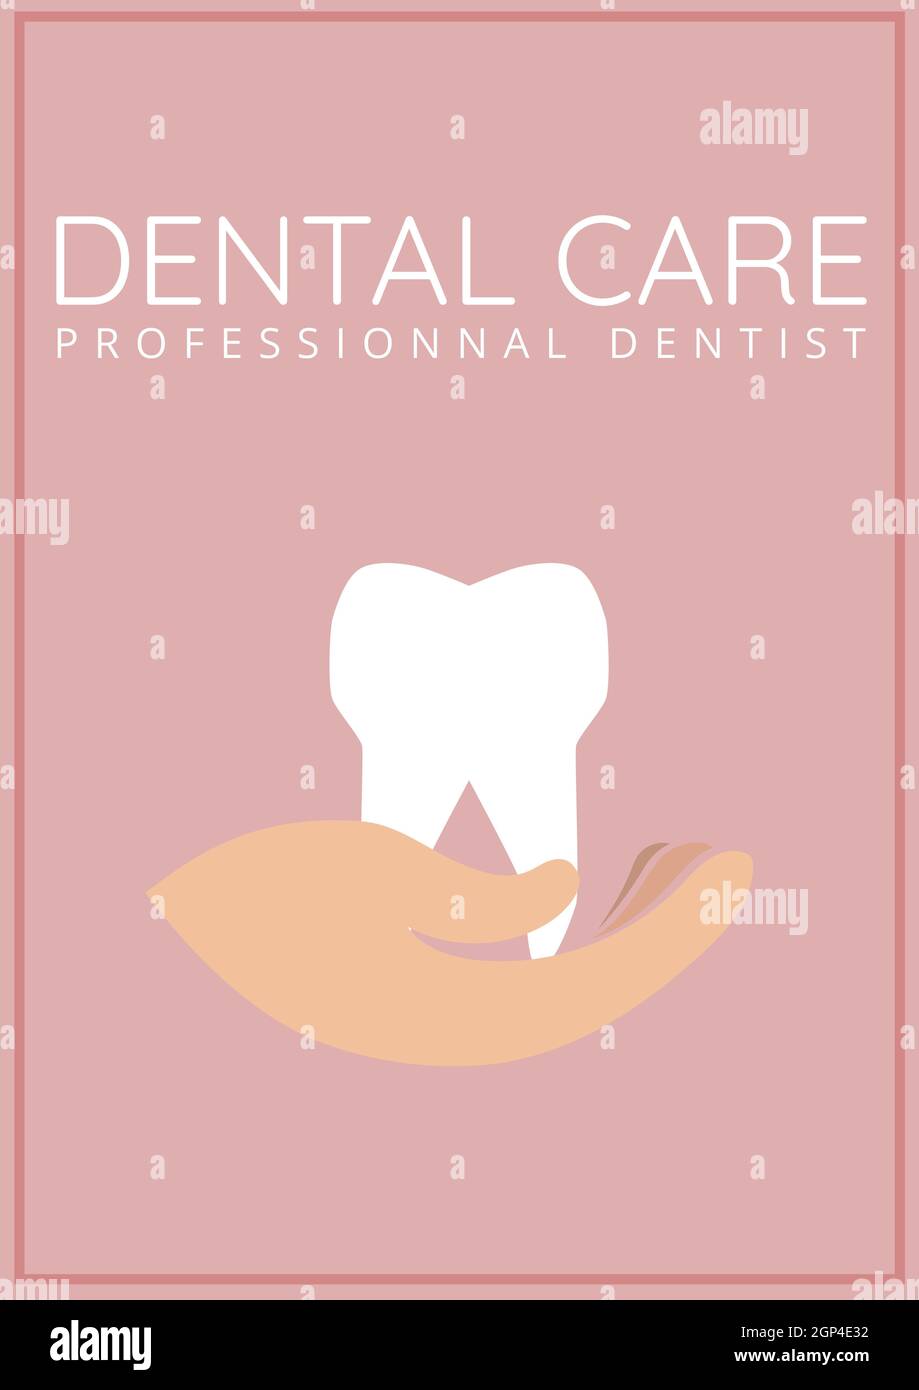 Composition of dental care text over tooth icon on pink background Stock Photo